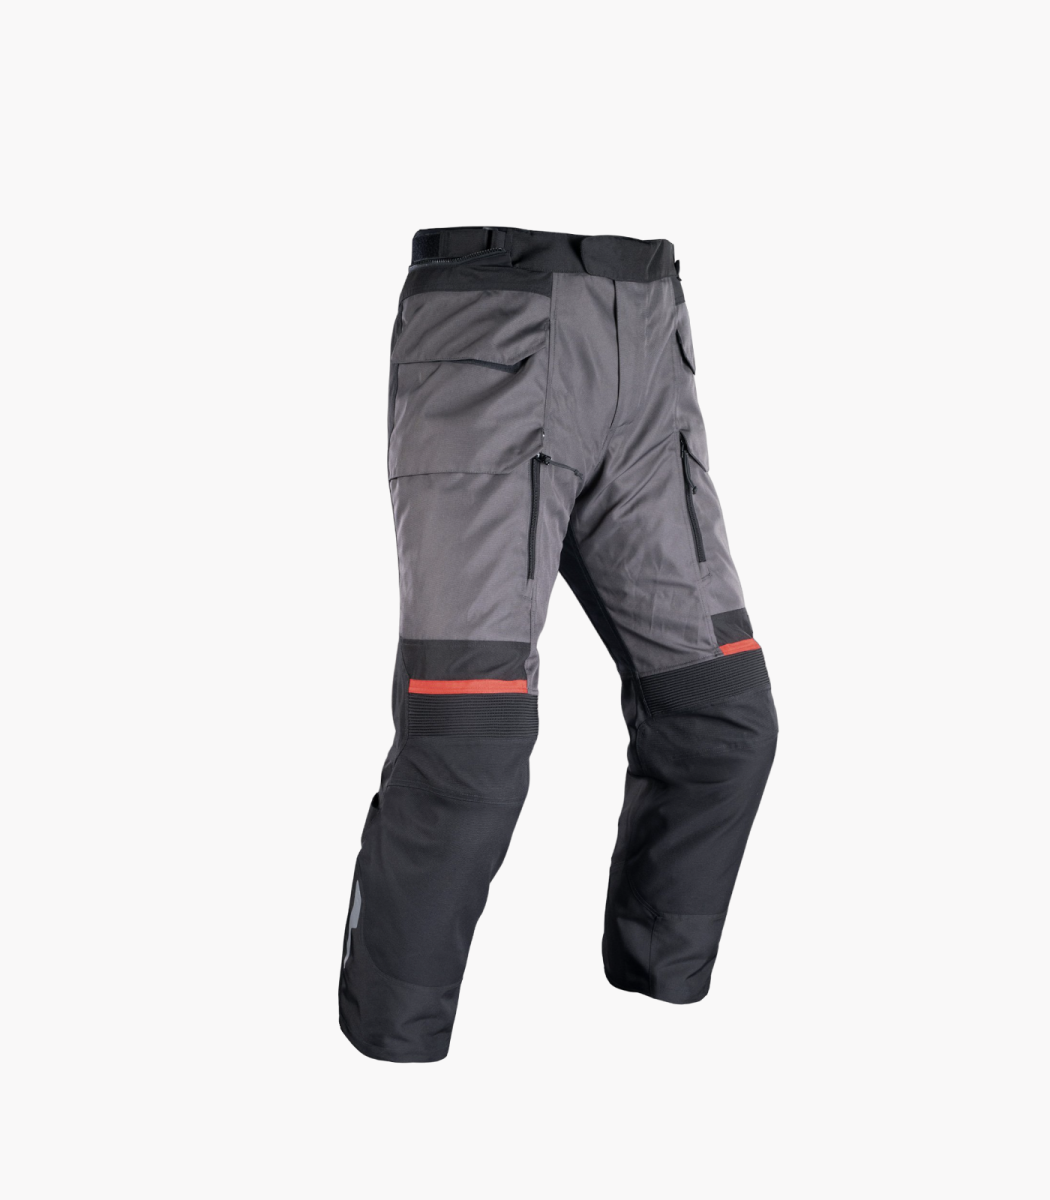 OXFORD ROCKLAND MS PANTS - CHARCOAL/BLACK/RED